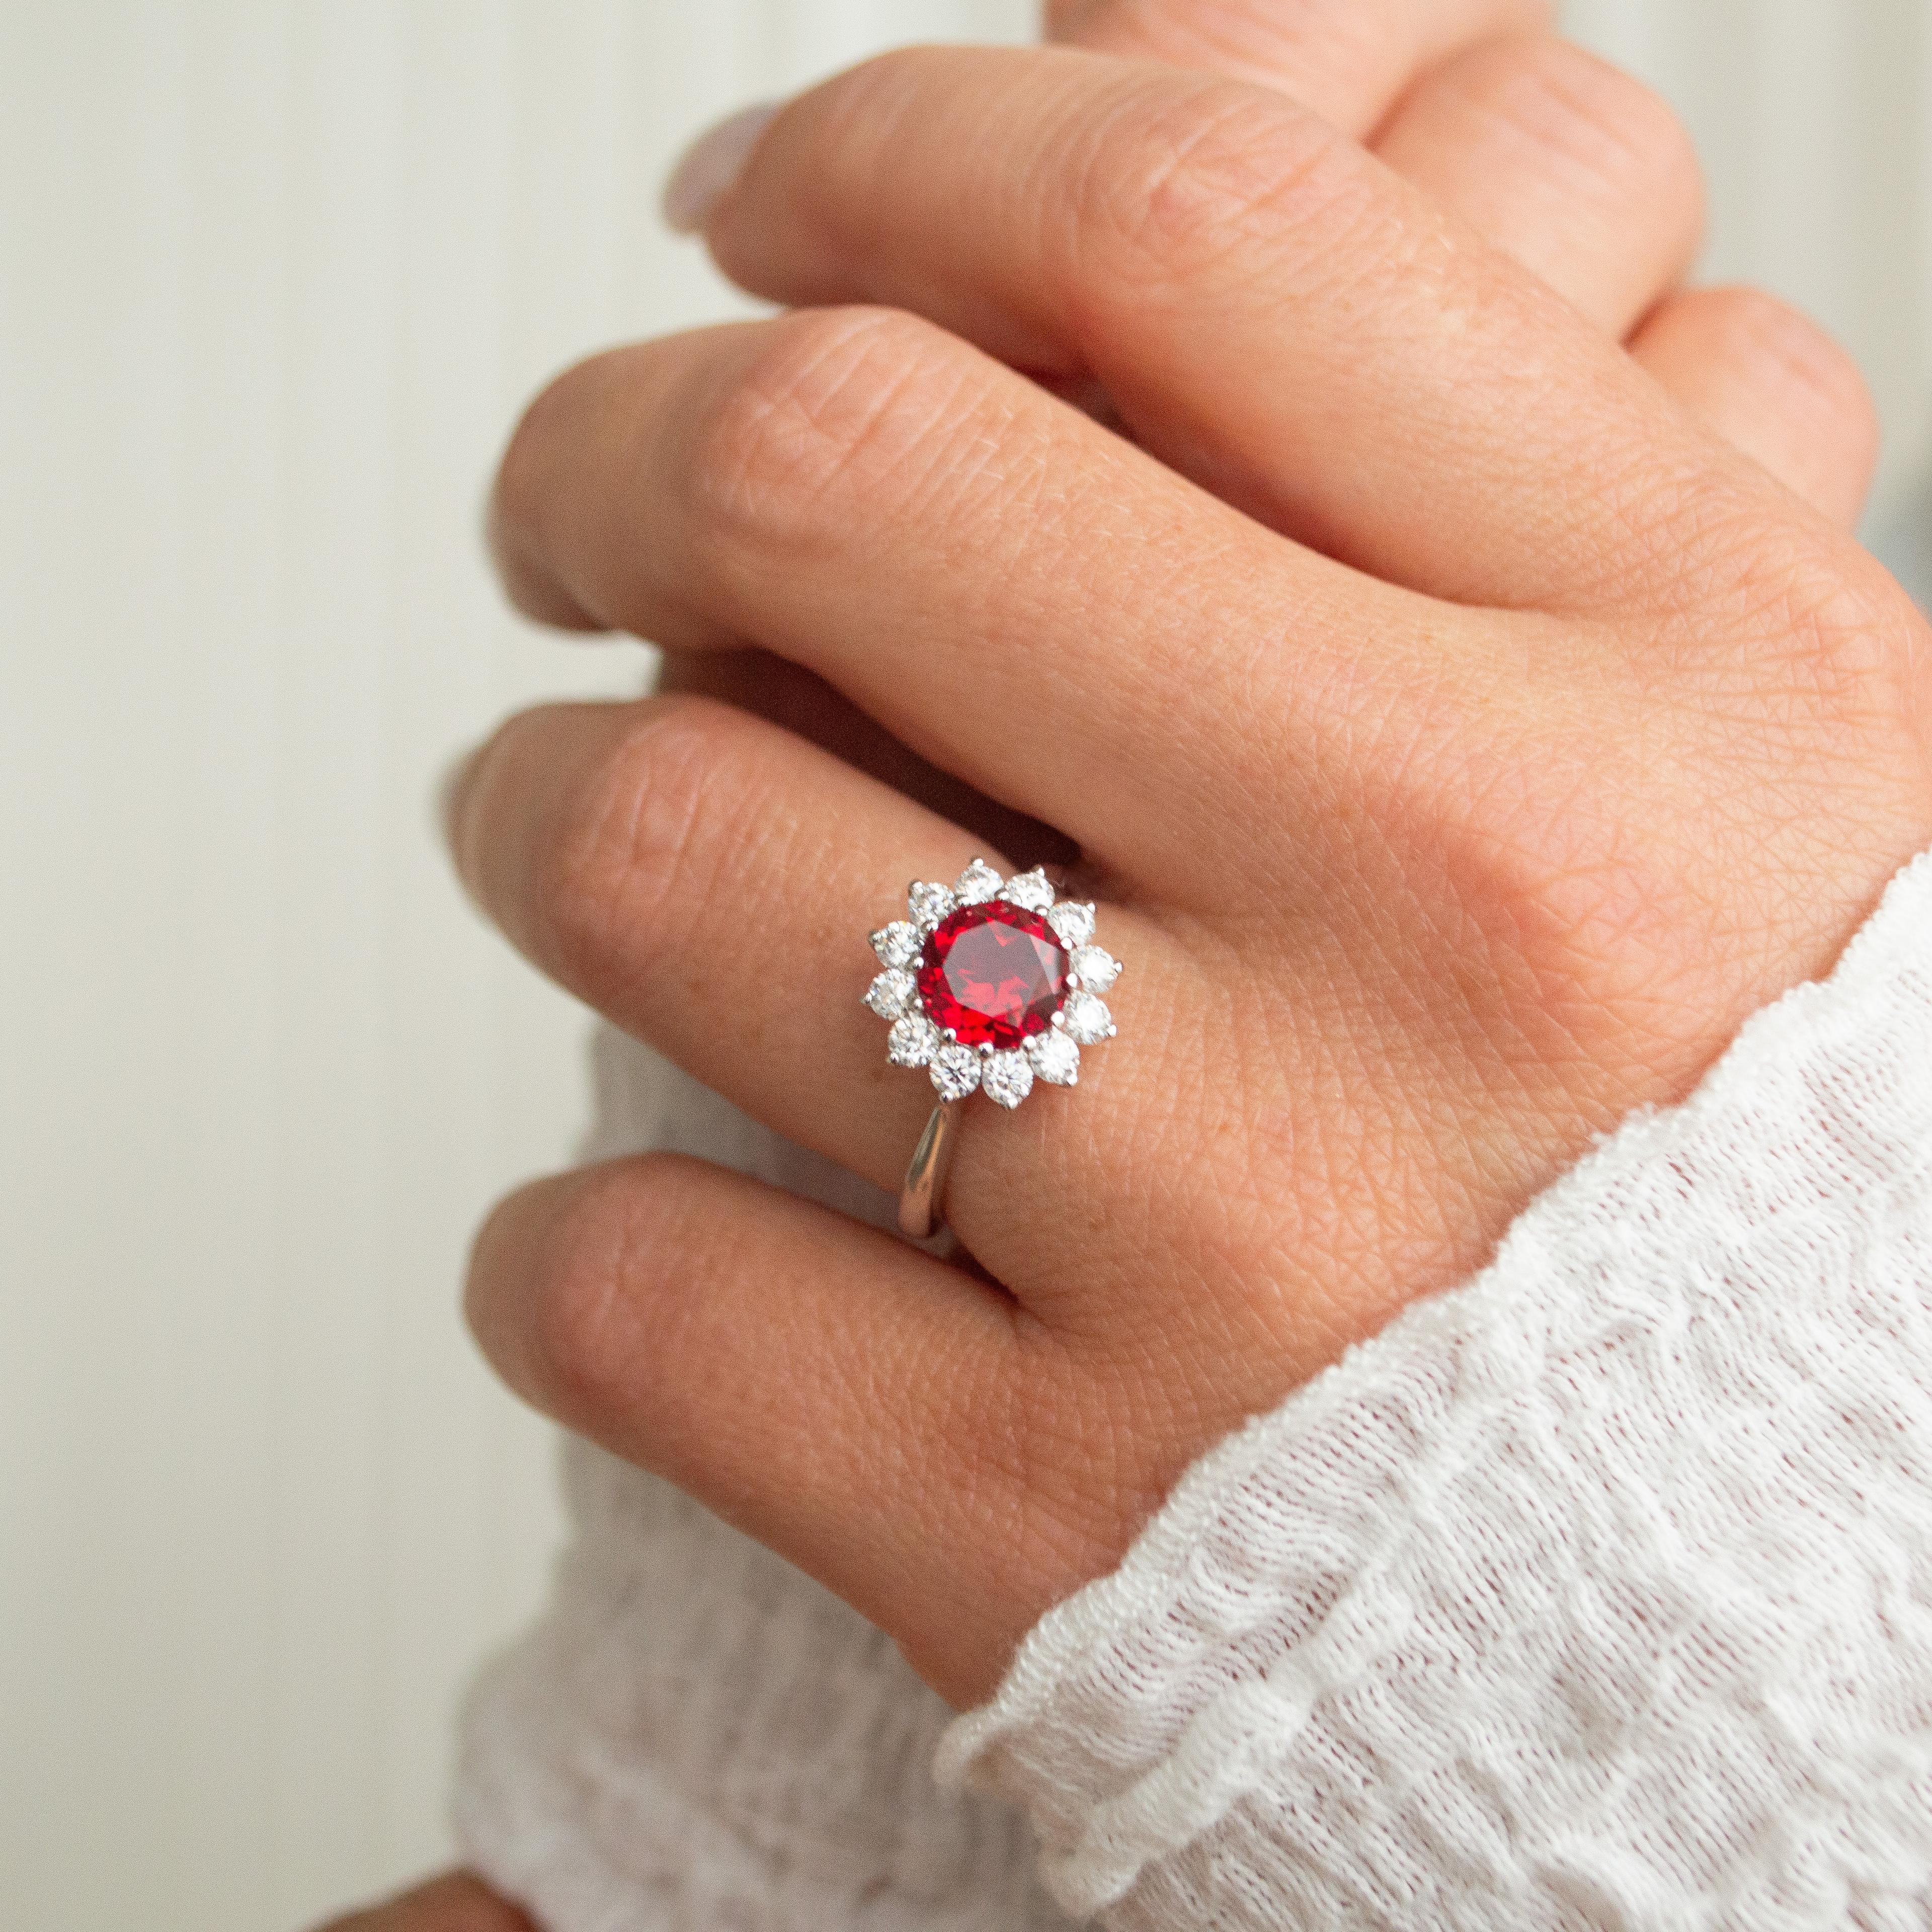 1 carat round cut ruby with diamond halo in a yellow gold band.